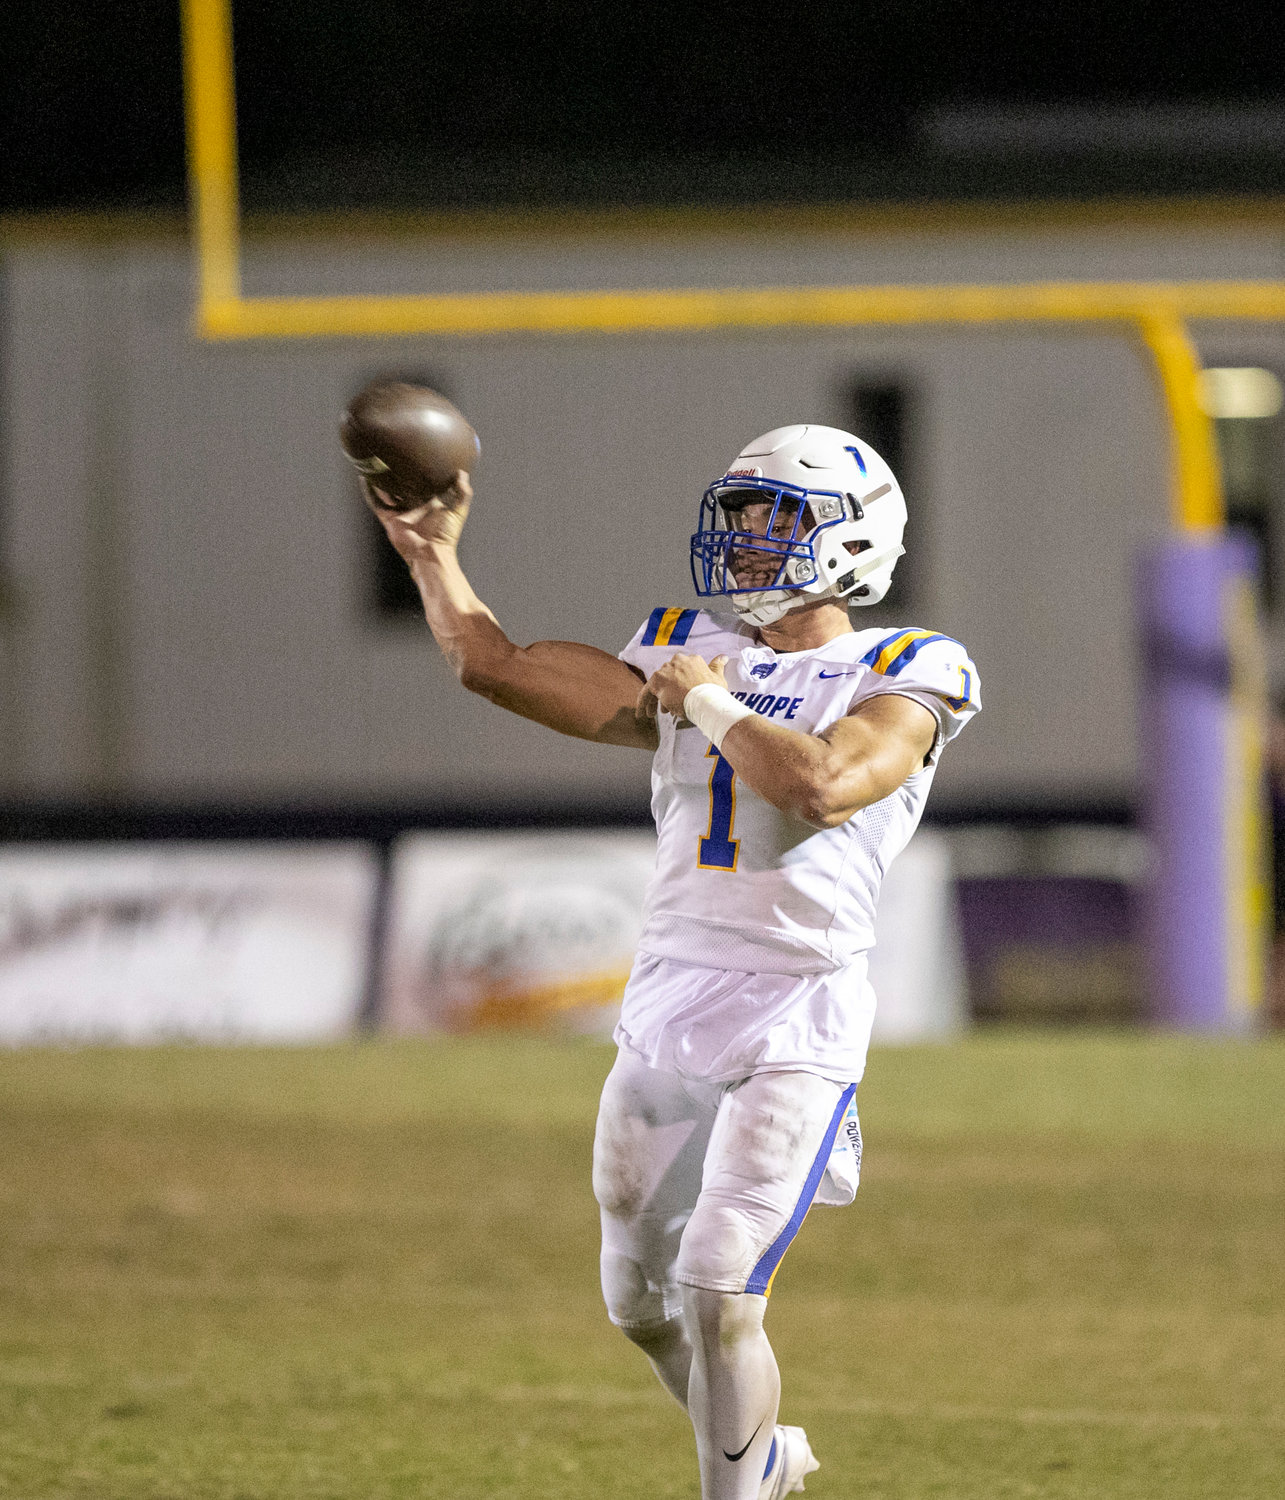 Fairhope senior Caden Creel launches a throw downfield during the Pirates’ Class 7A Region 1 game against the Daphne Trojans at Jubilee Stadium Oct. 7. Creel announced his commitment to the Jacksonville State Gamecocks Thursday, Dec. 8.